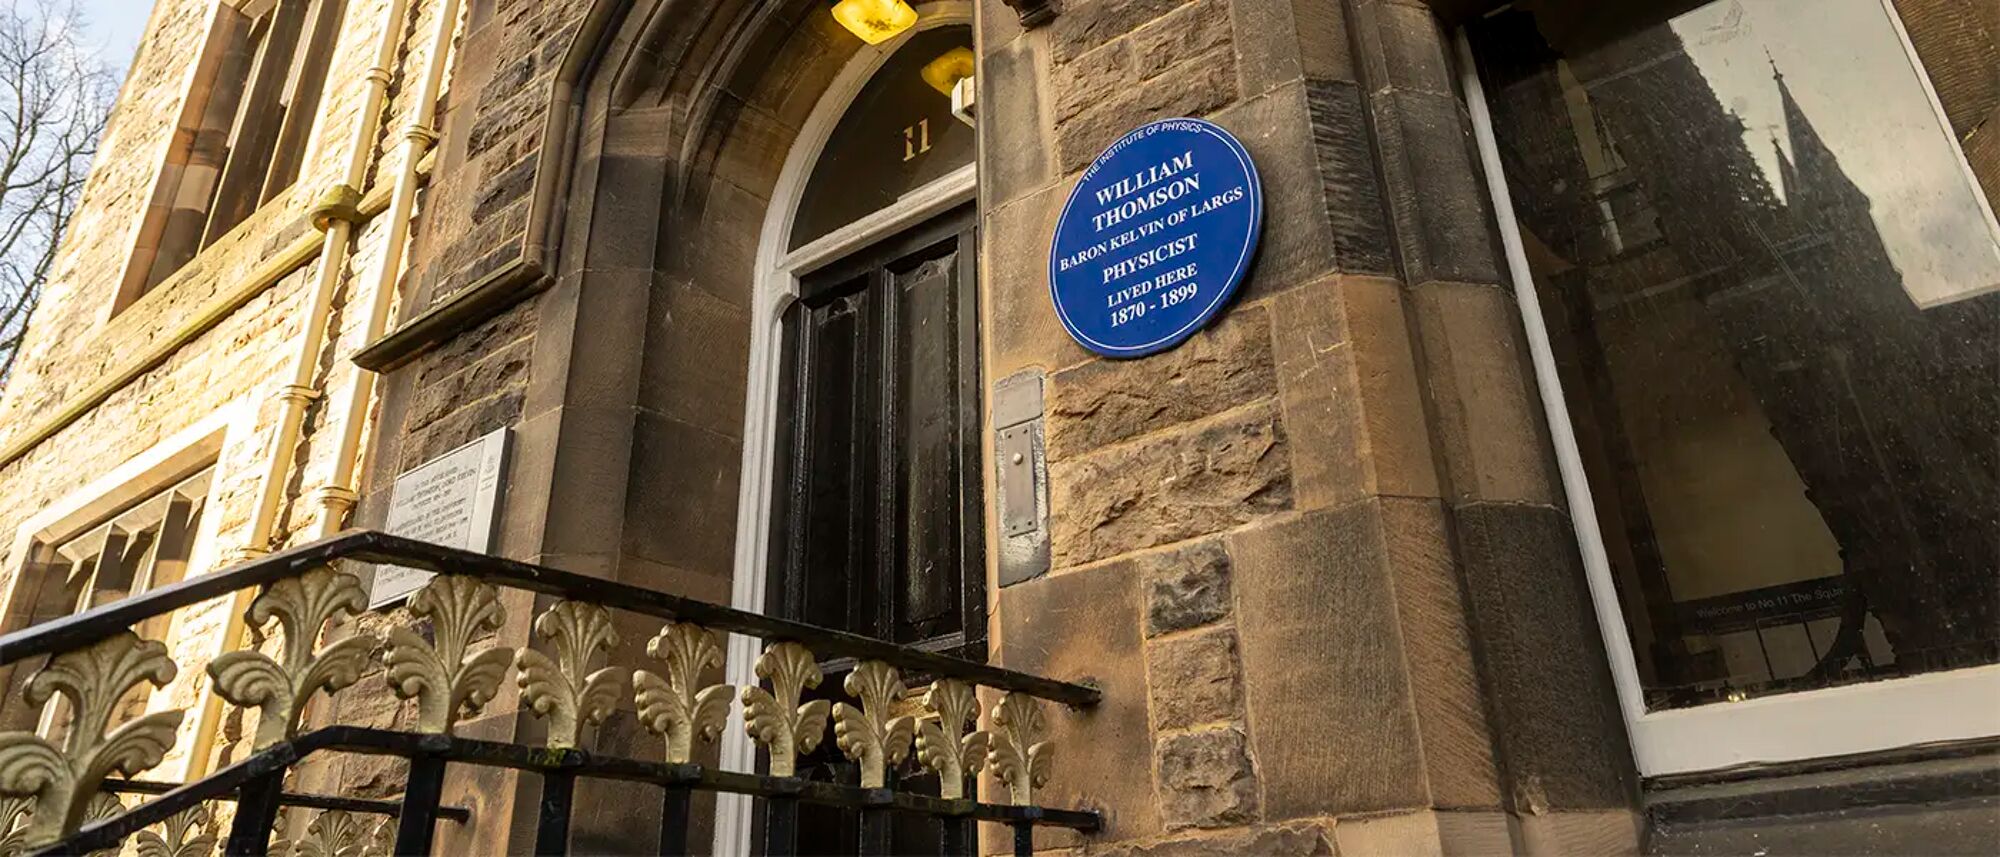 No 11 Professors' Square, home of Lord Kelvin